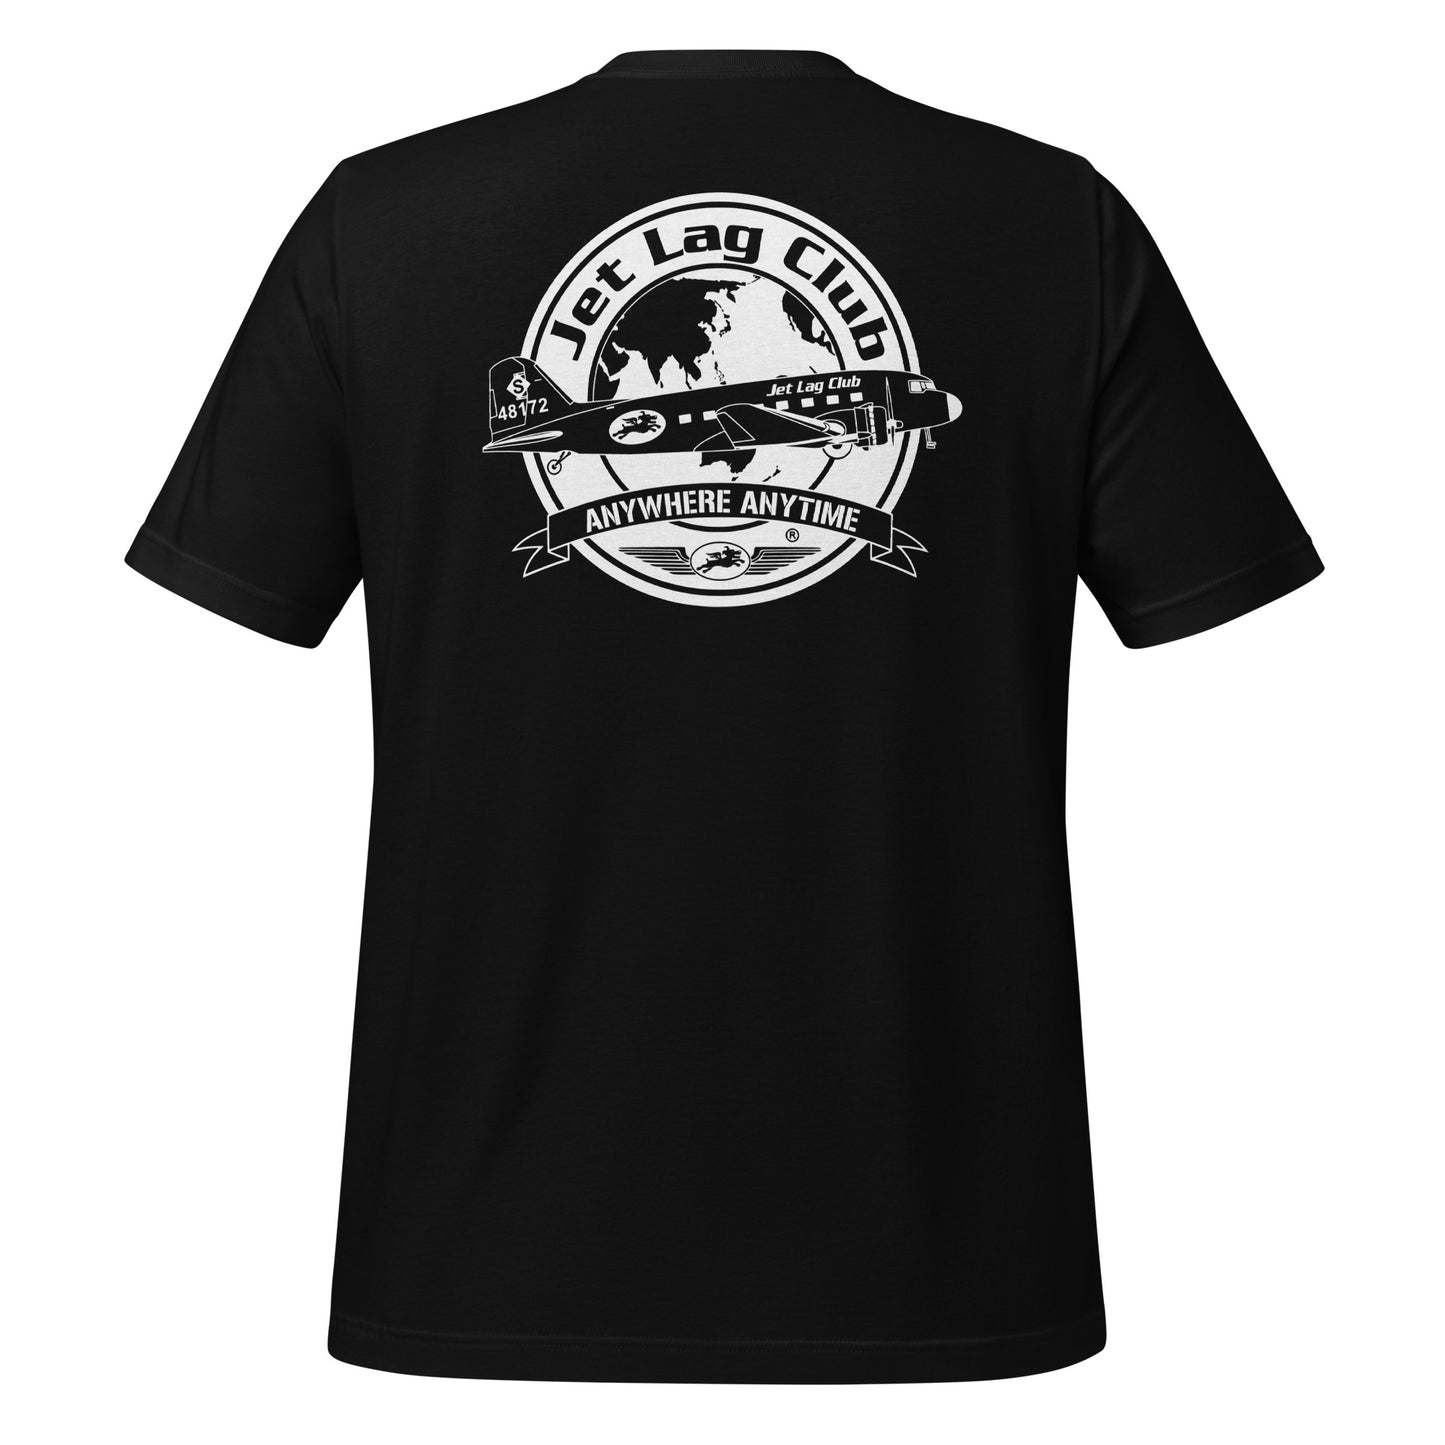 Jet Lag Club® Time Zone Busters T-shirt